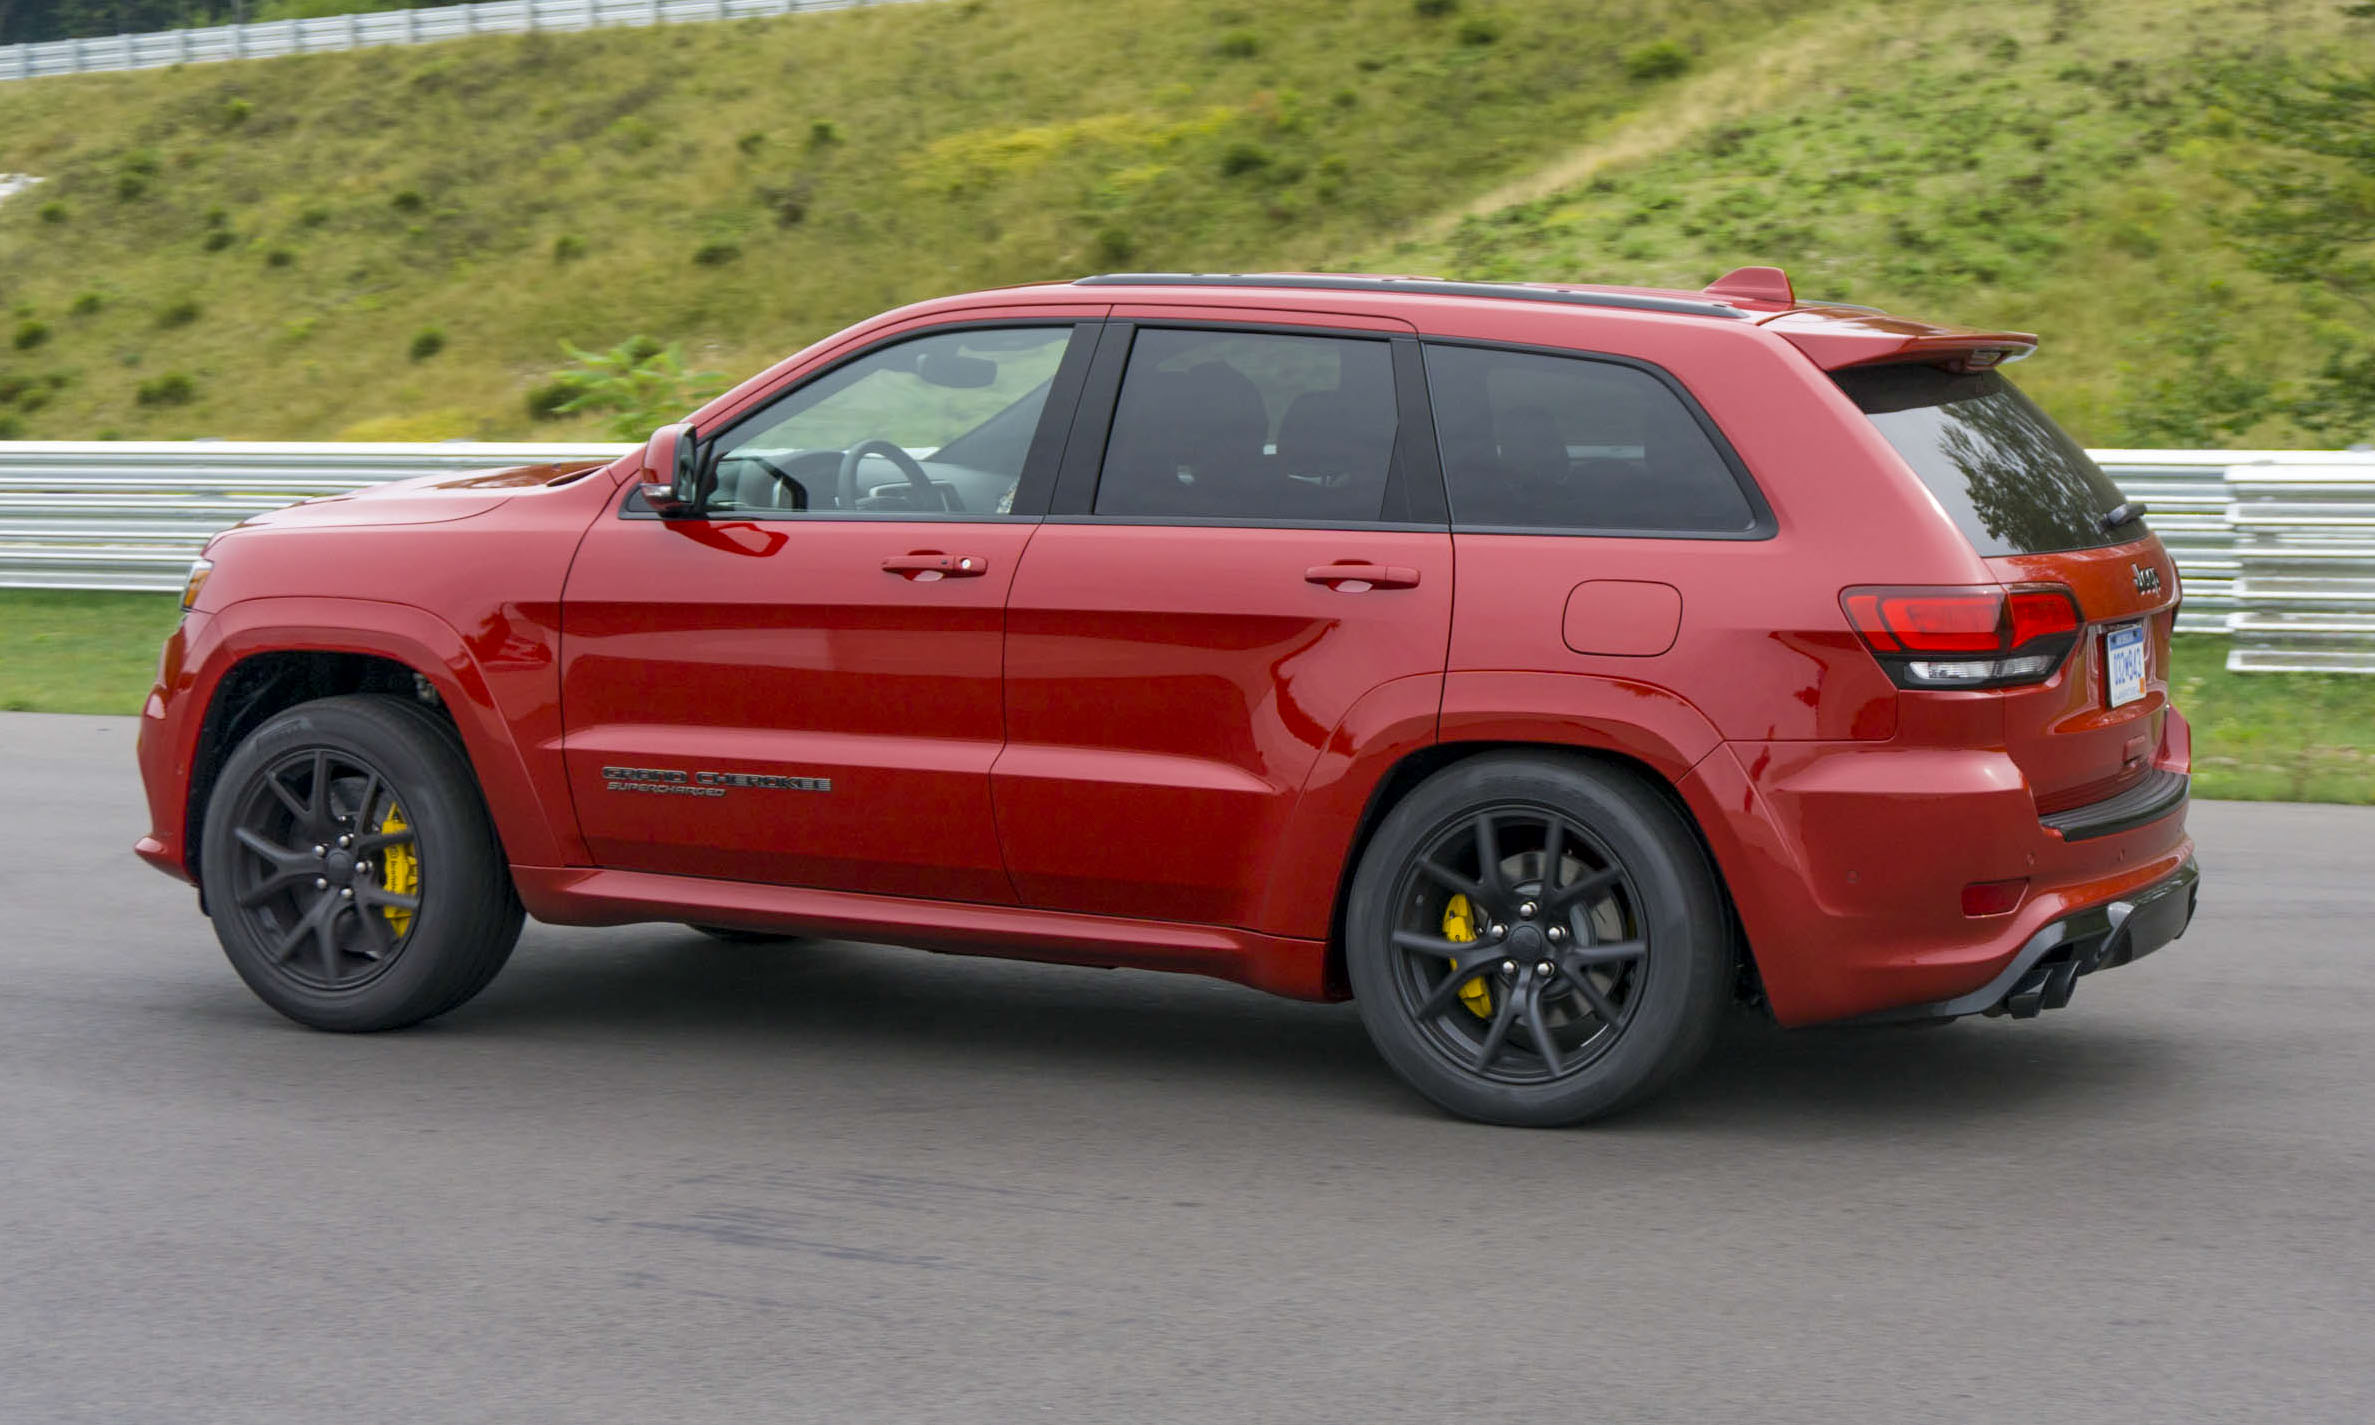 2018 Jeep Grand Cherokee Trackhawk: First Drive Review